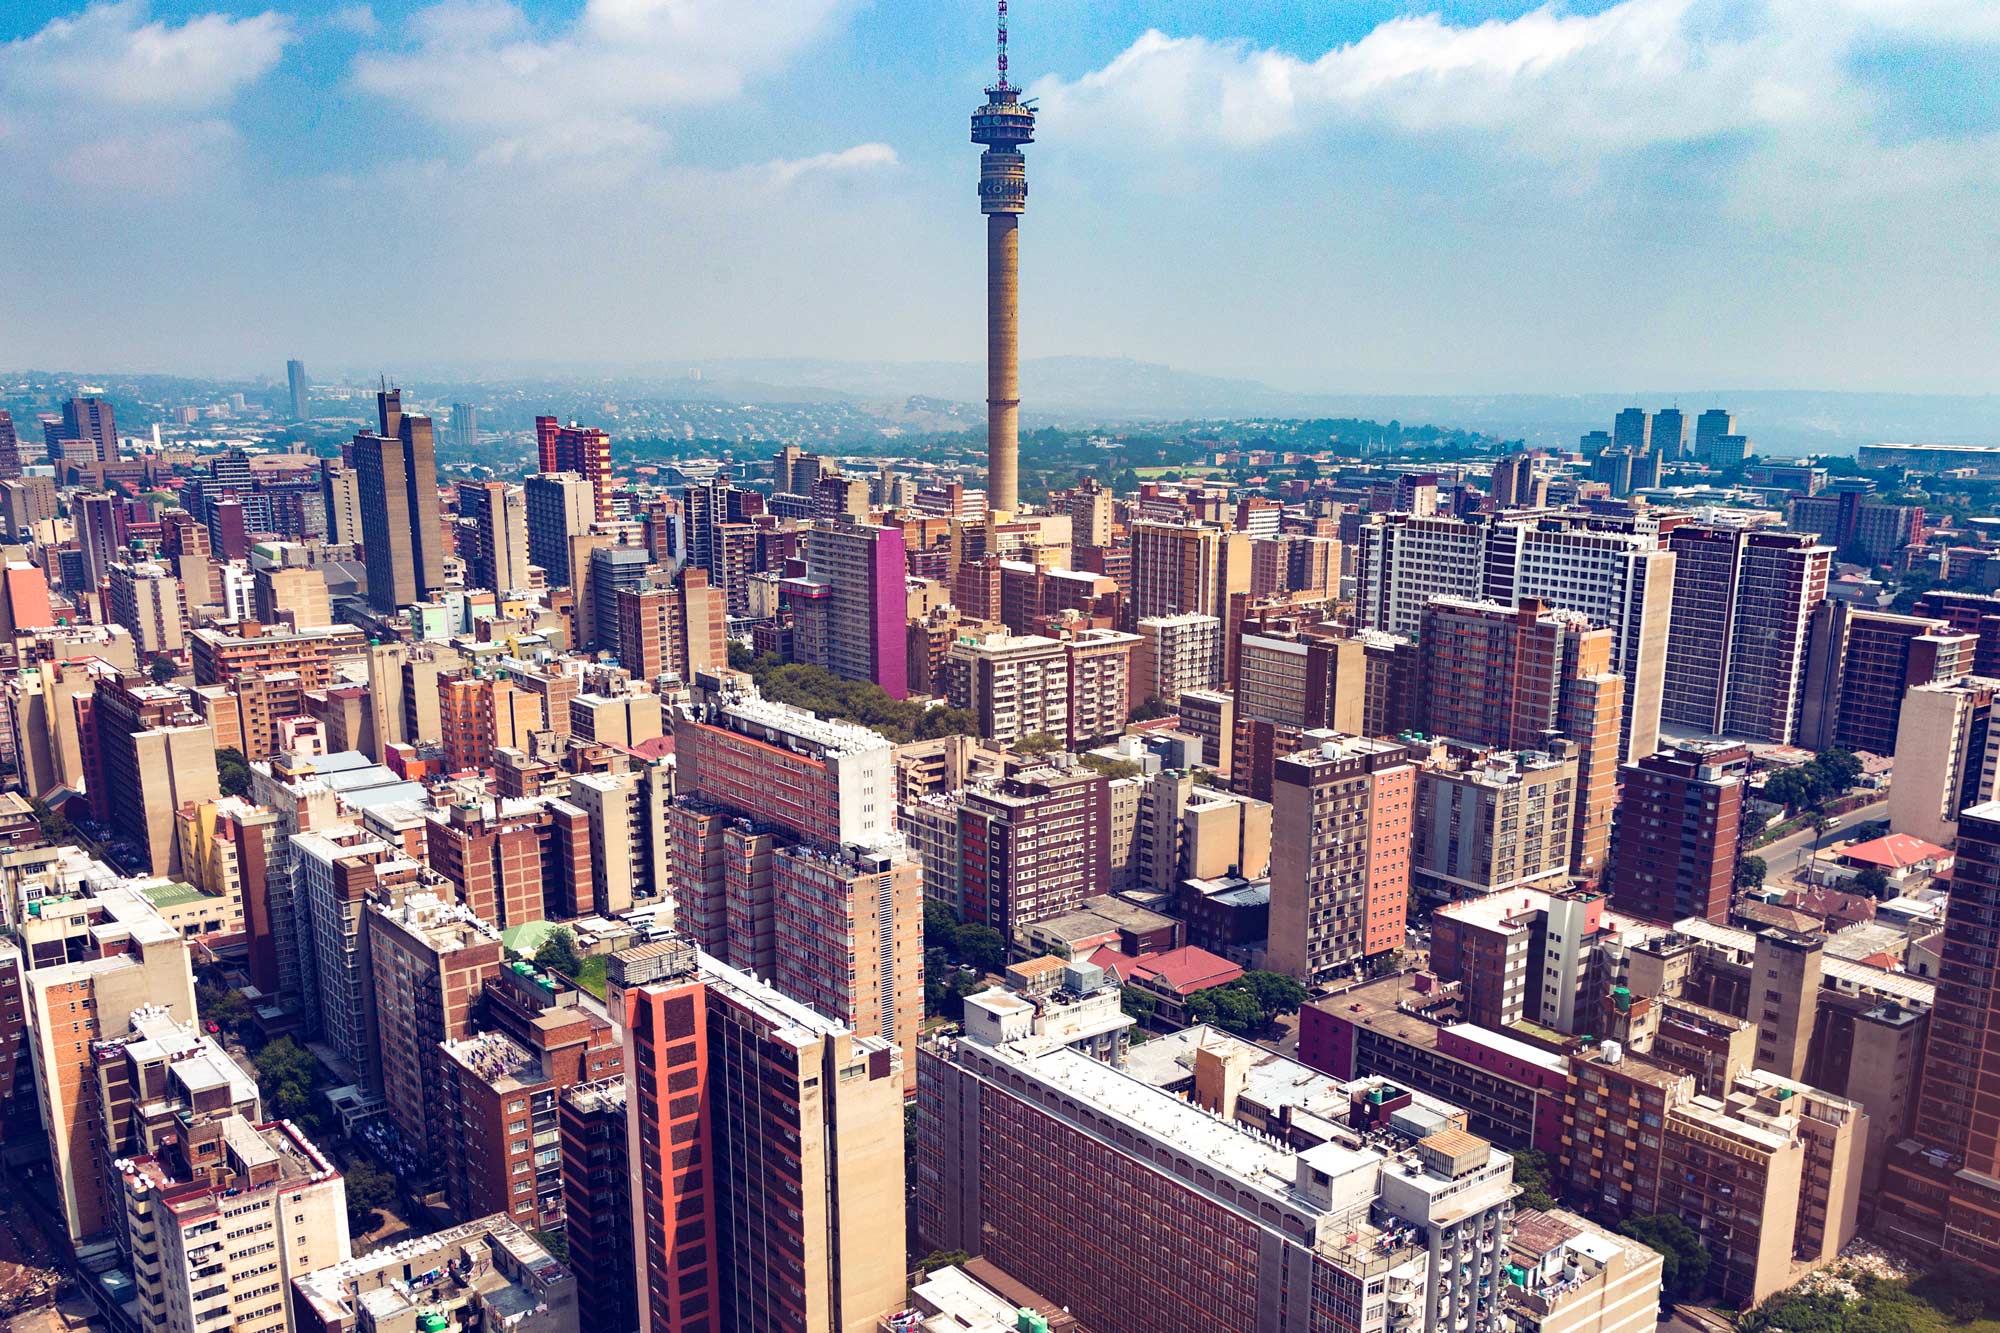 Aerial view of Johannesburg